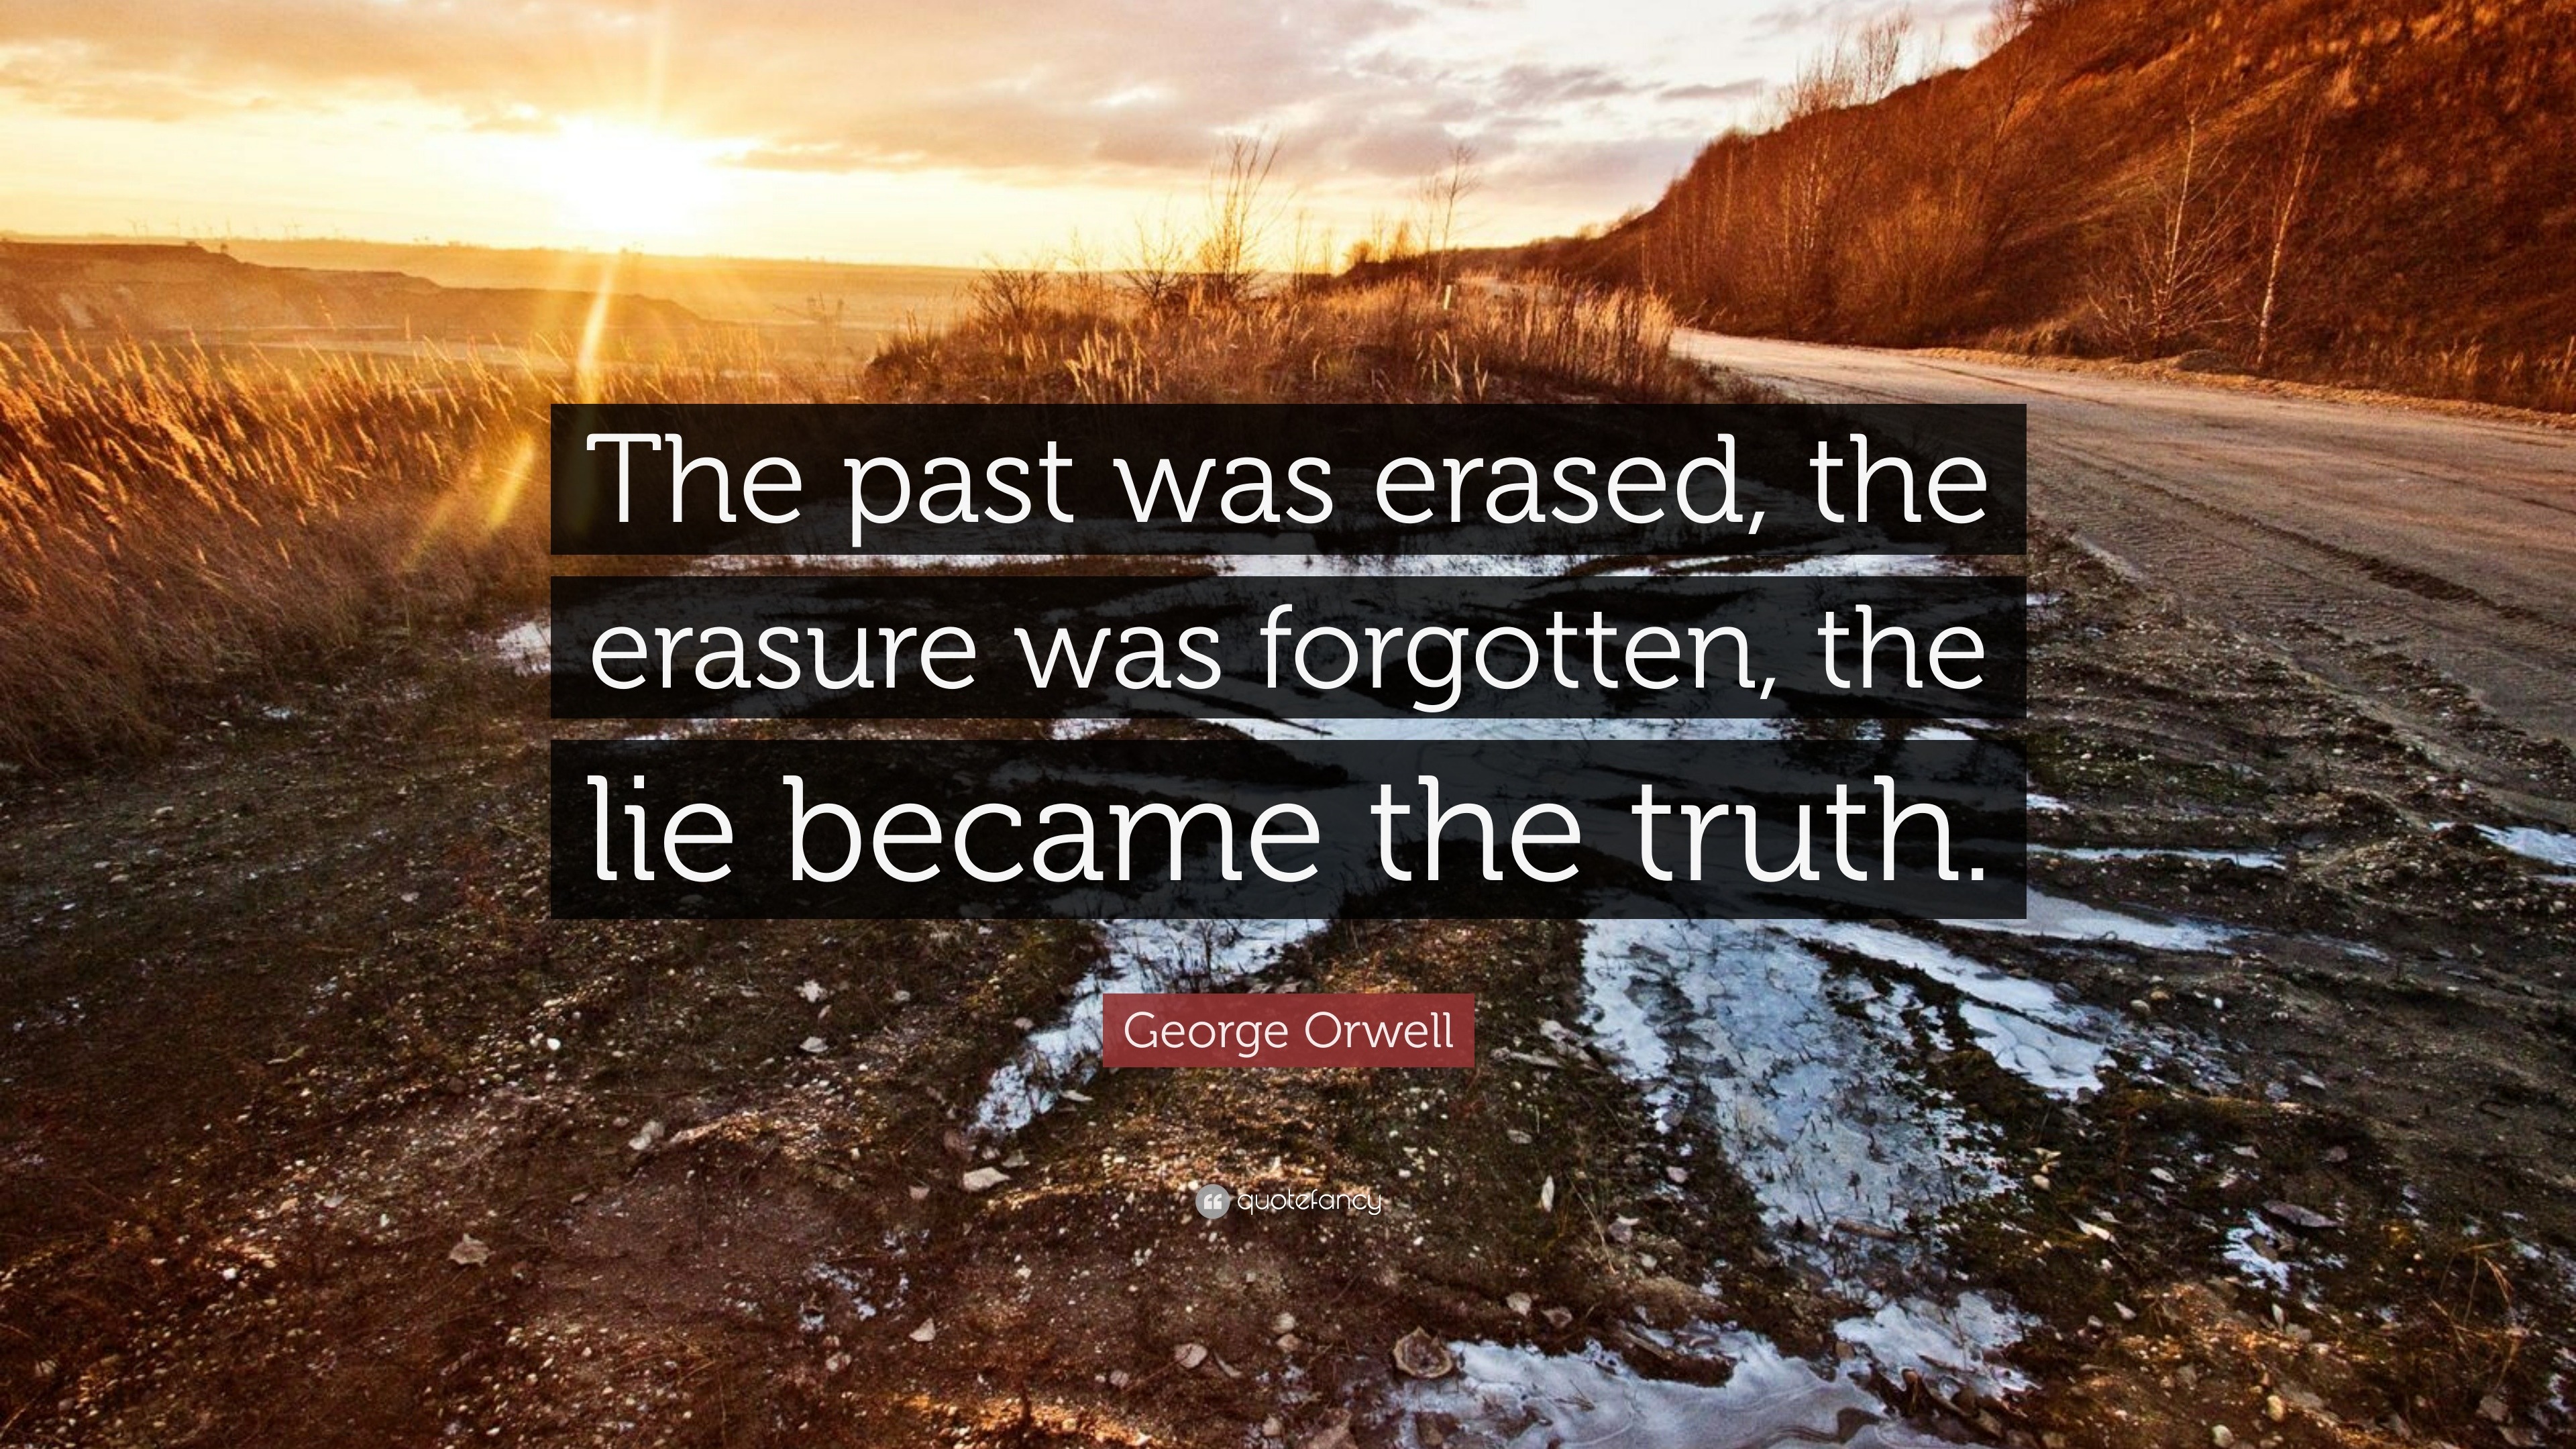 1737107 George Orwell Quote The past was erased the erasure was forgotten